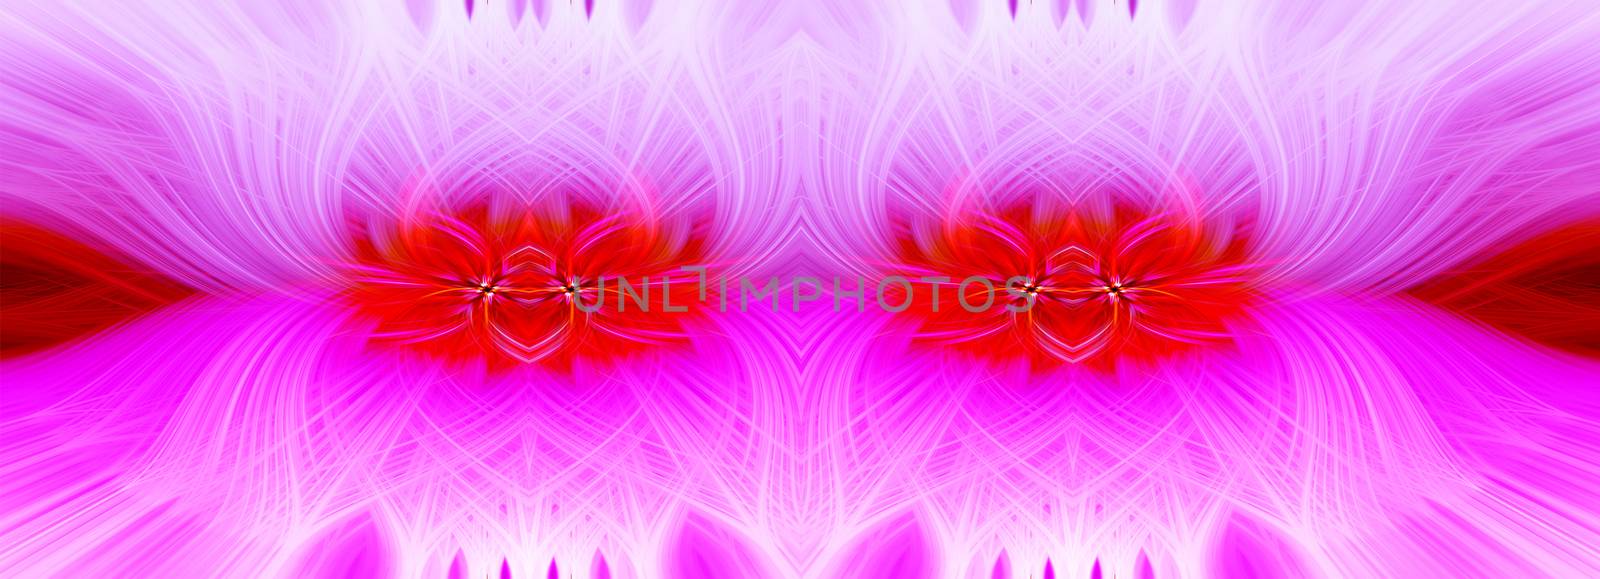 Beautiful abstract intertwined symmetrical 3d fibers forming a shape of sparkle, flame, flower, interlinked hearts. Pink, red, and purple colors. Illustration. Banner and panorama size